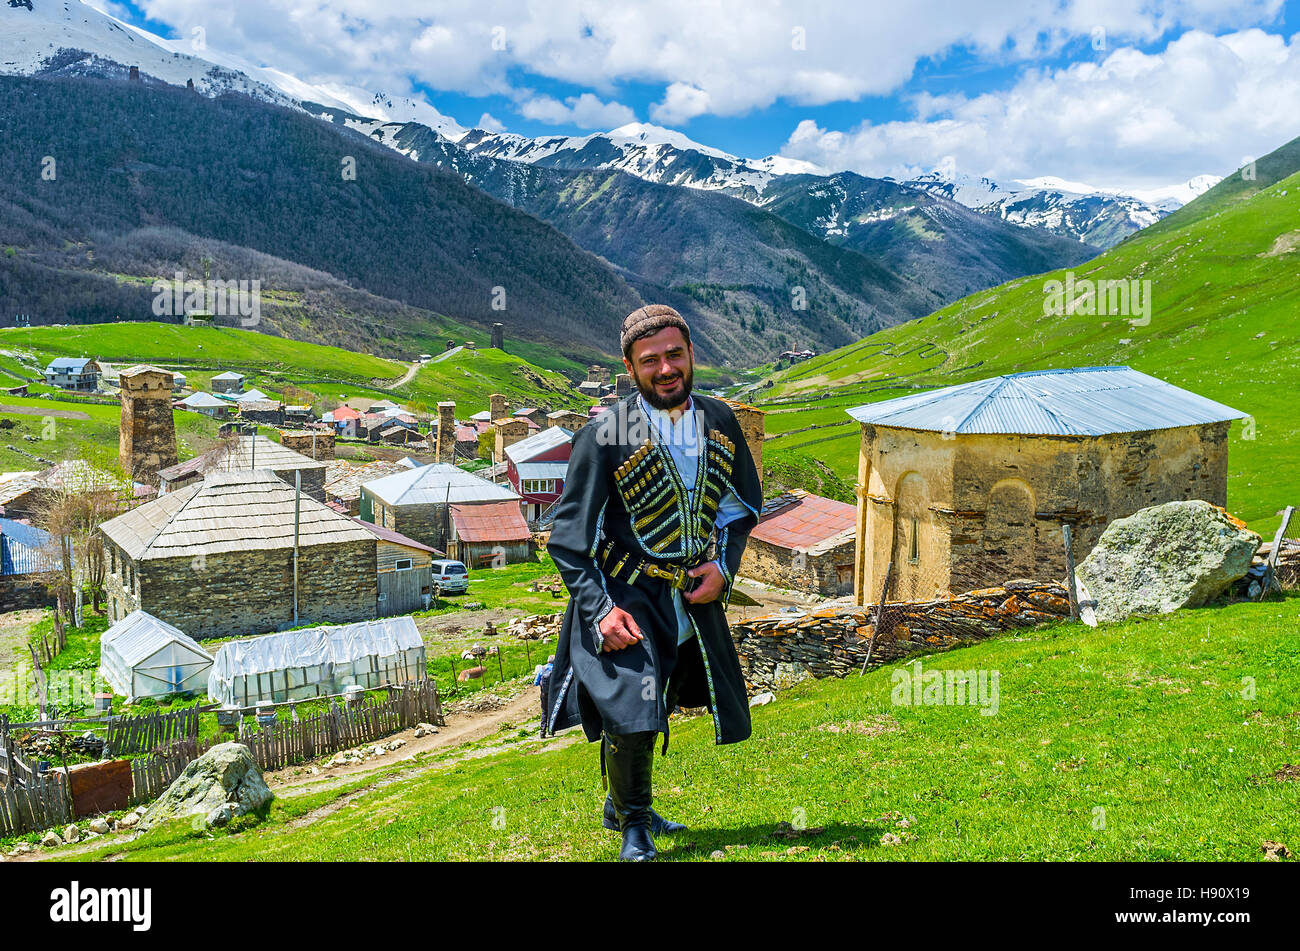 The young Svan in traditional costume poses with the village on the background Stock Photo